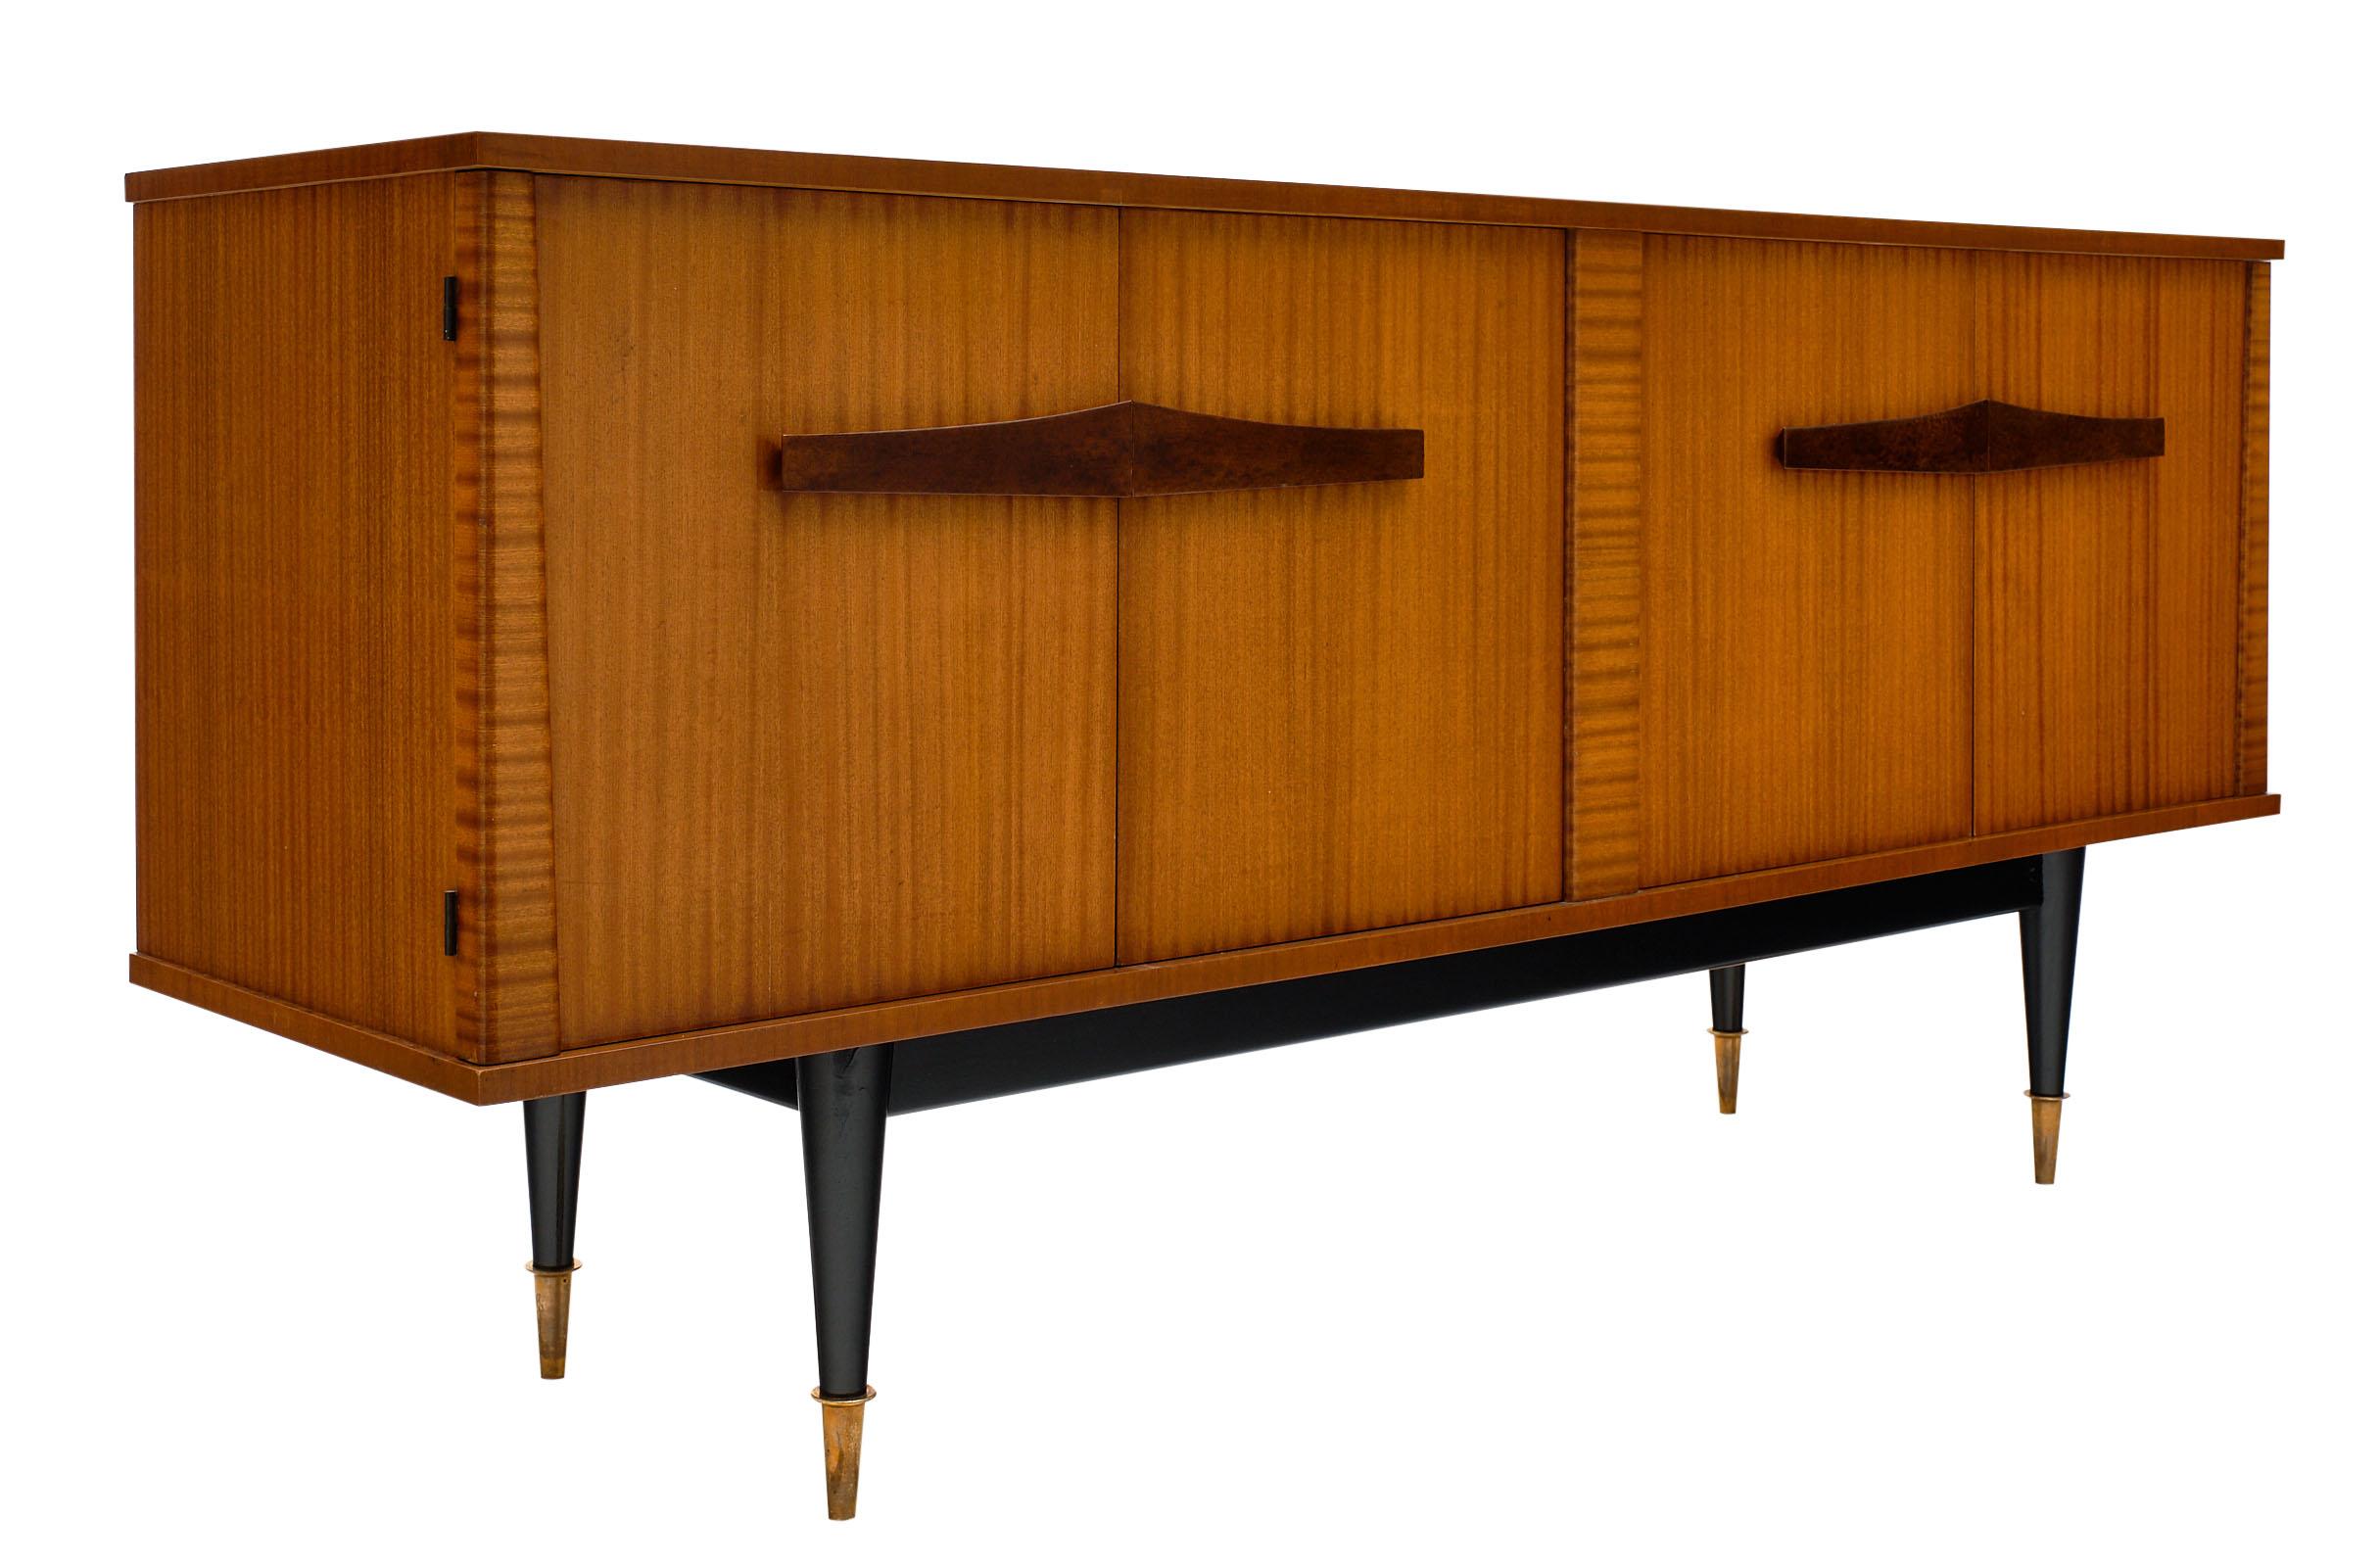 Midcentury French rosewood buffet with a banded rosewood and tinted rosewood handles. The tapered legs and capped with gilt brass feet. We love the elegance of this modernist piece. The doors open to reveal interior shelving and drawers.